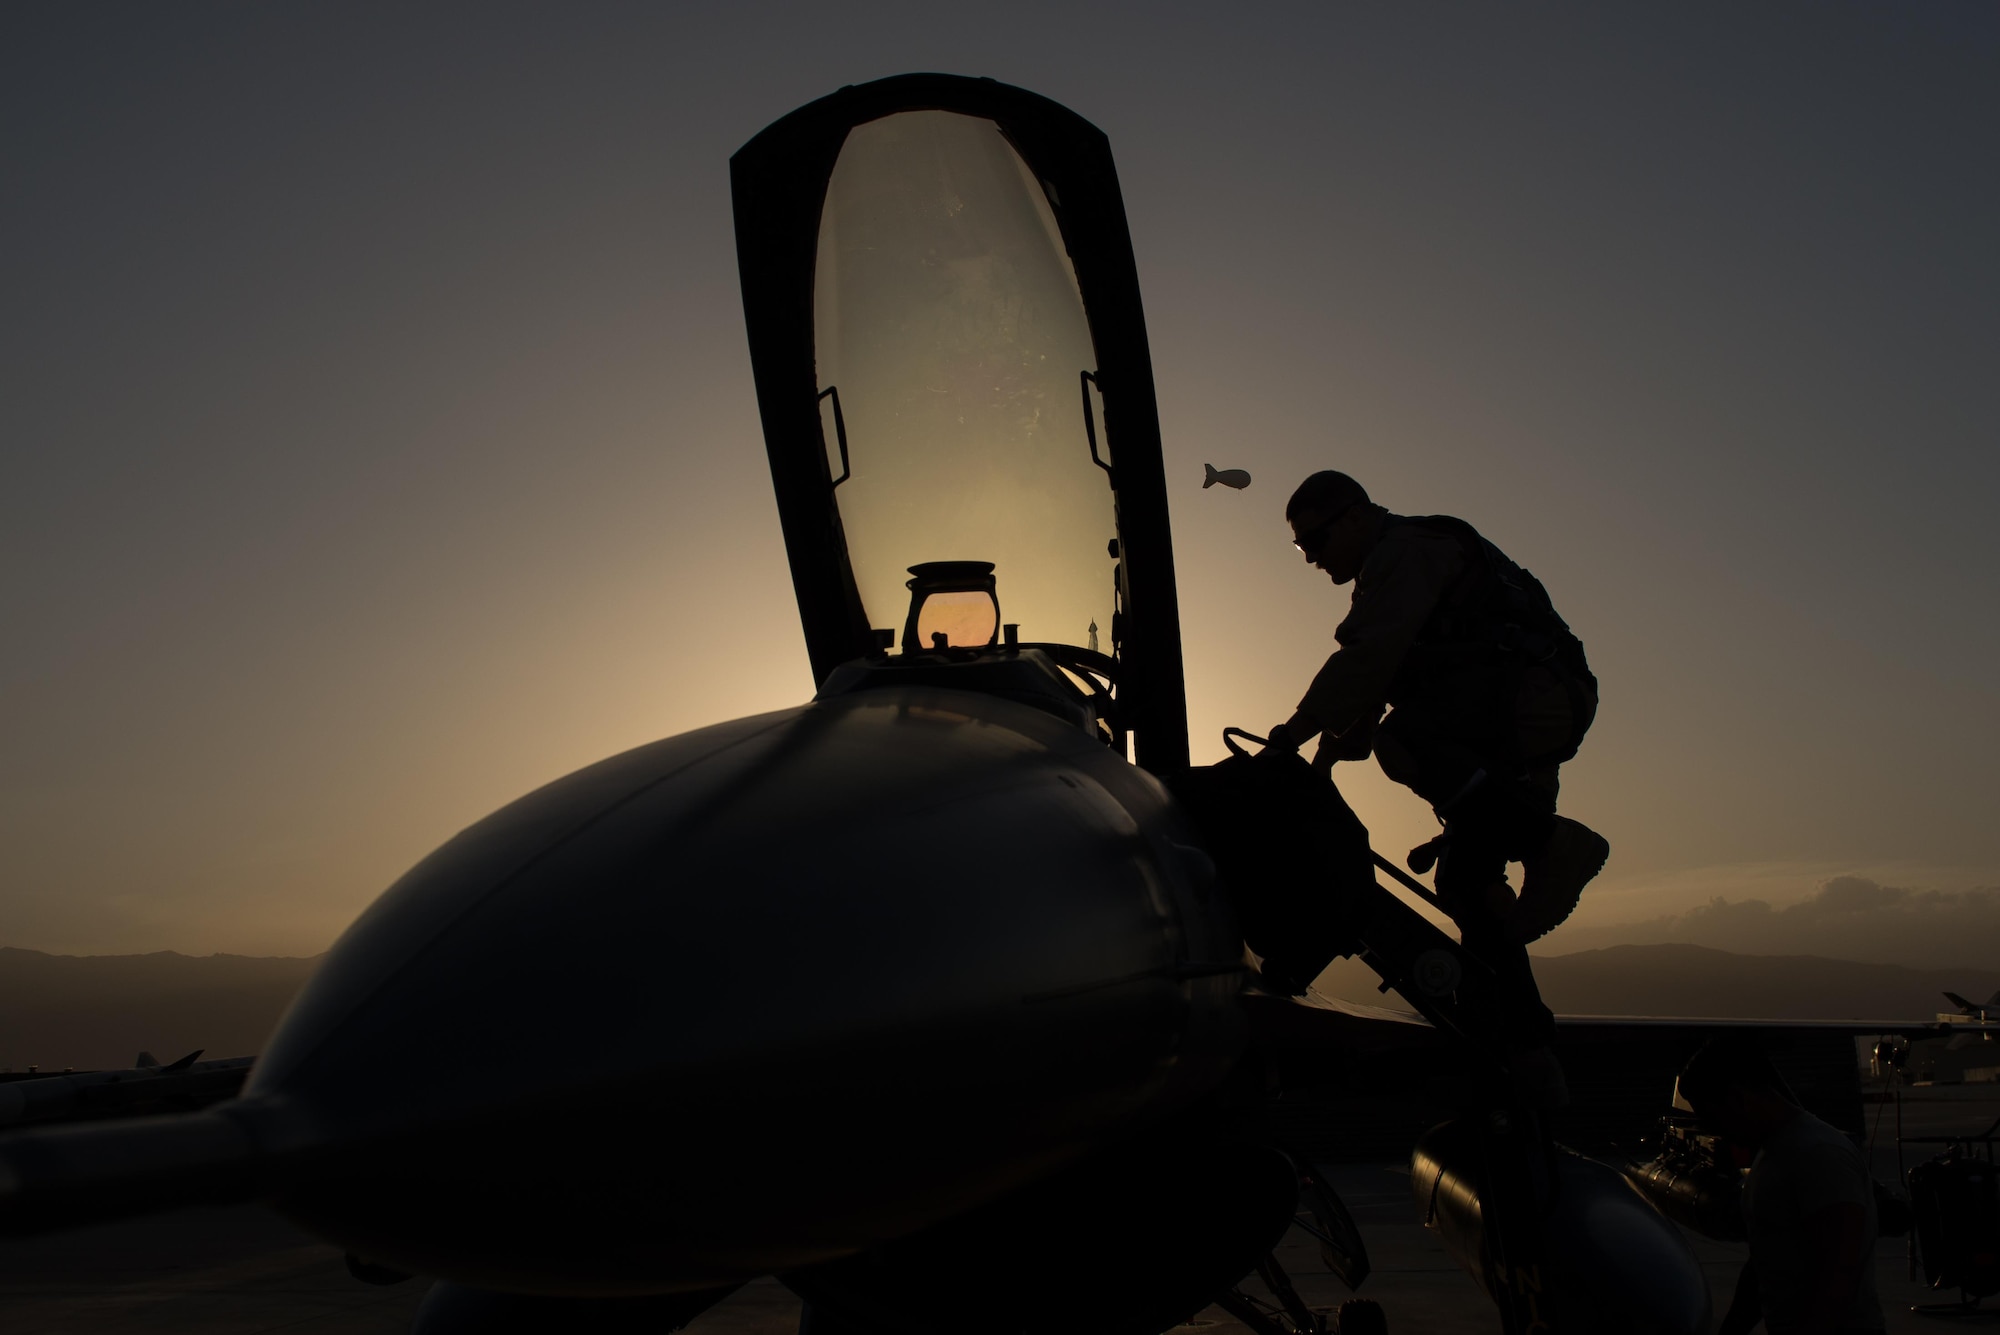 U.S. Air Force Capt. Doug Mayo, 555th Expeditionary Fighter Squadron, enters an F-16 Fighting Falcon aircraft before conducting a preflight inspection with Staff Sgt. William Harris, 455th Expeditionary Maintenance Squadron crew chief, at Bagram Airfield, Afghanistan, June 8, 2015. The 455th EAMXS ensure Fighting Falcons on Bagram are prepared for flight and return them to a mission-ready state once they land.  (U.S. Air Force photo by Tech. Sgt. Joseph Swafford/Released)